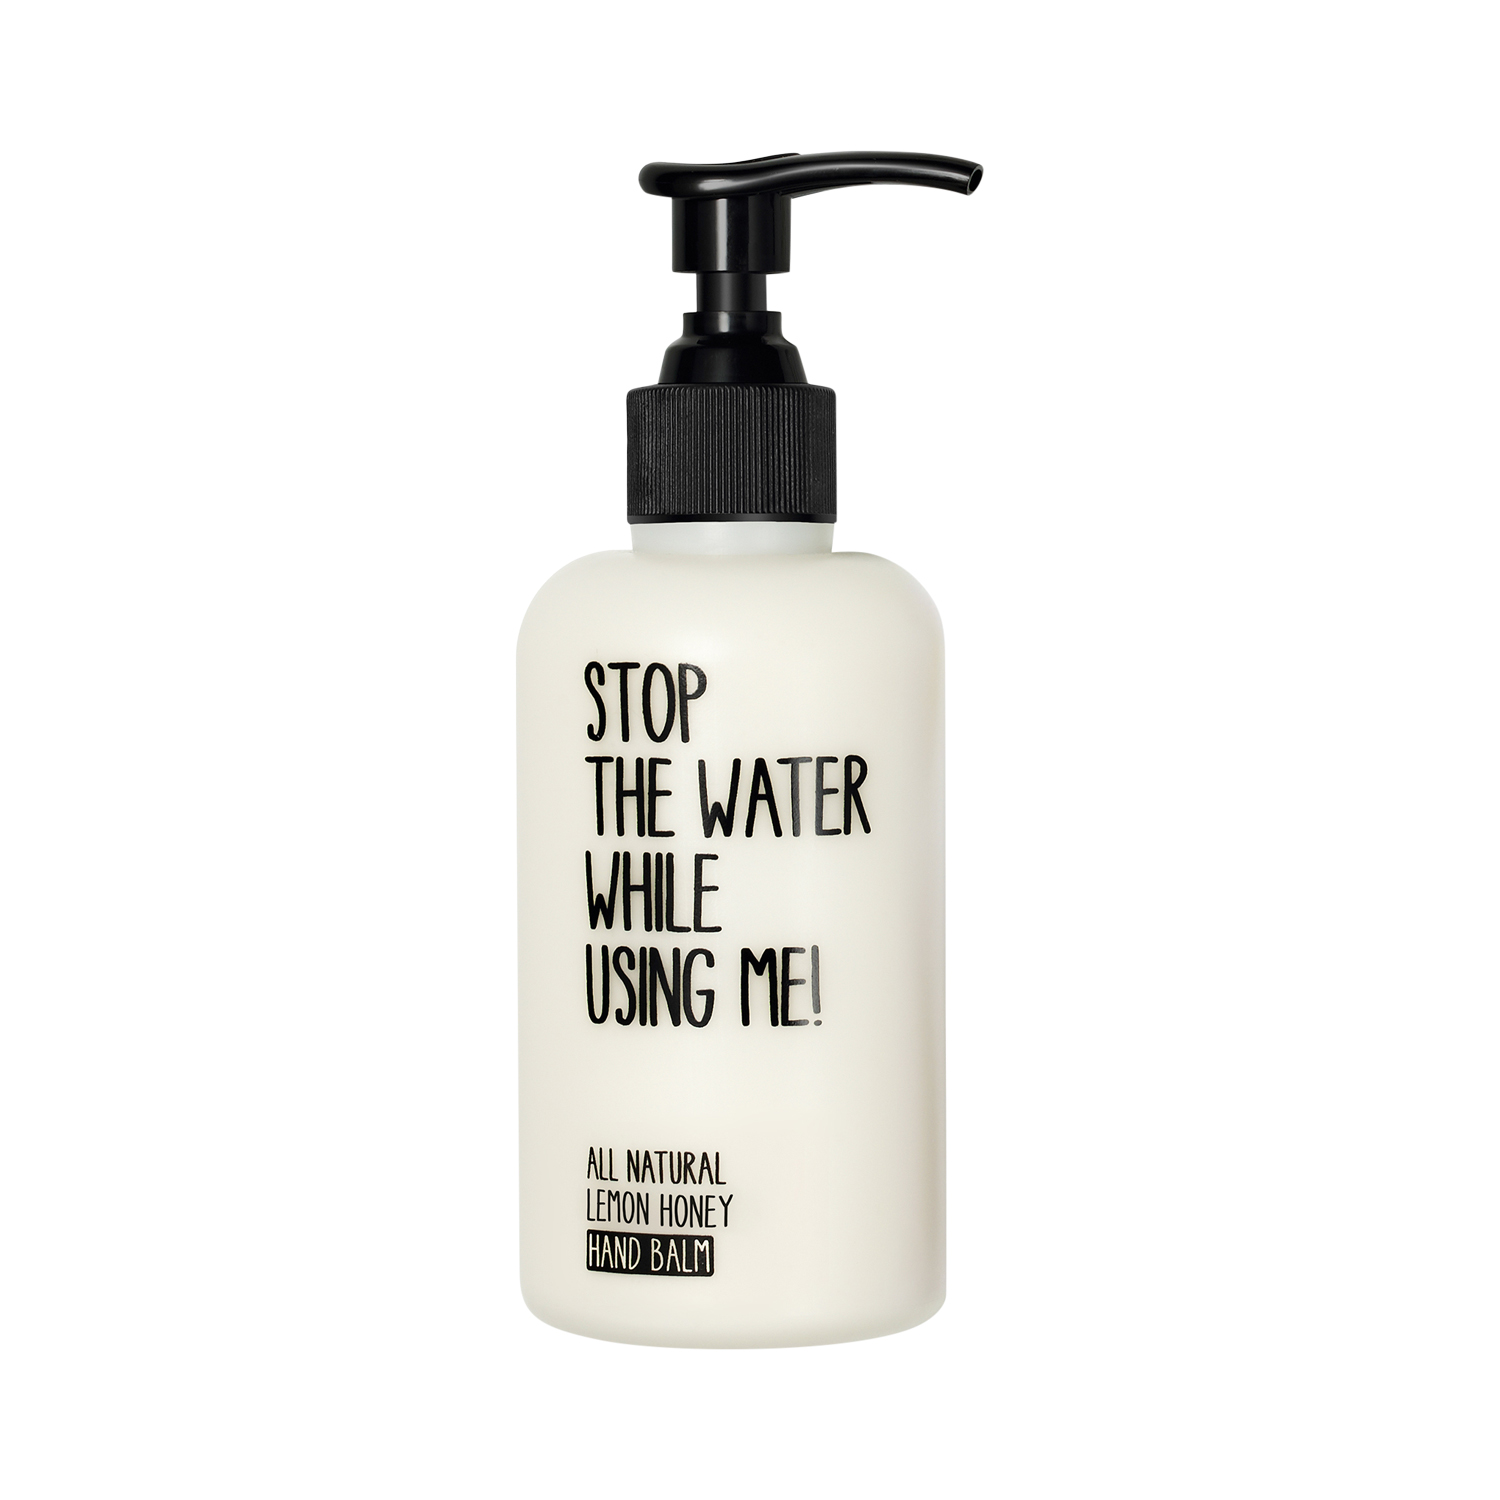 Stop The Water While Using Me! - All Natural Lemon Honey Hand Balm - Handcreme